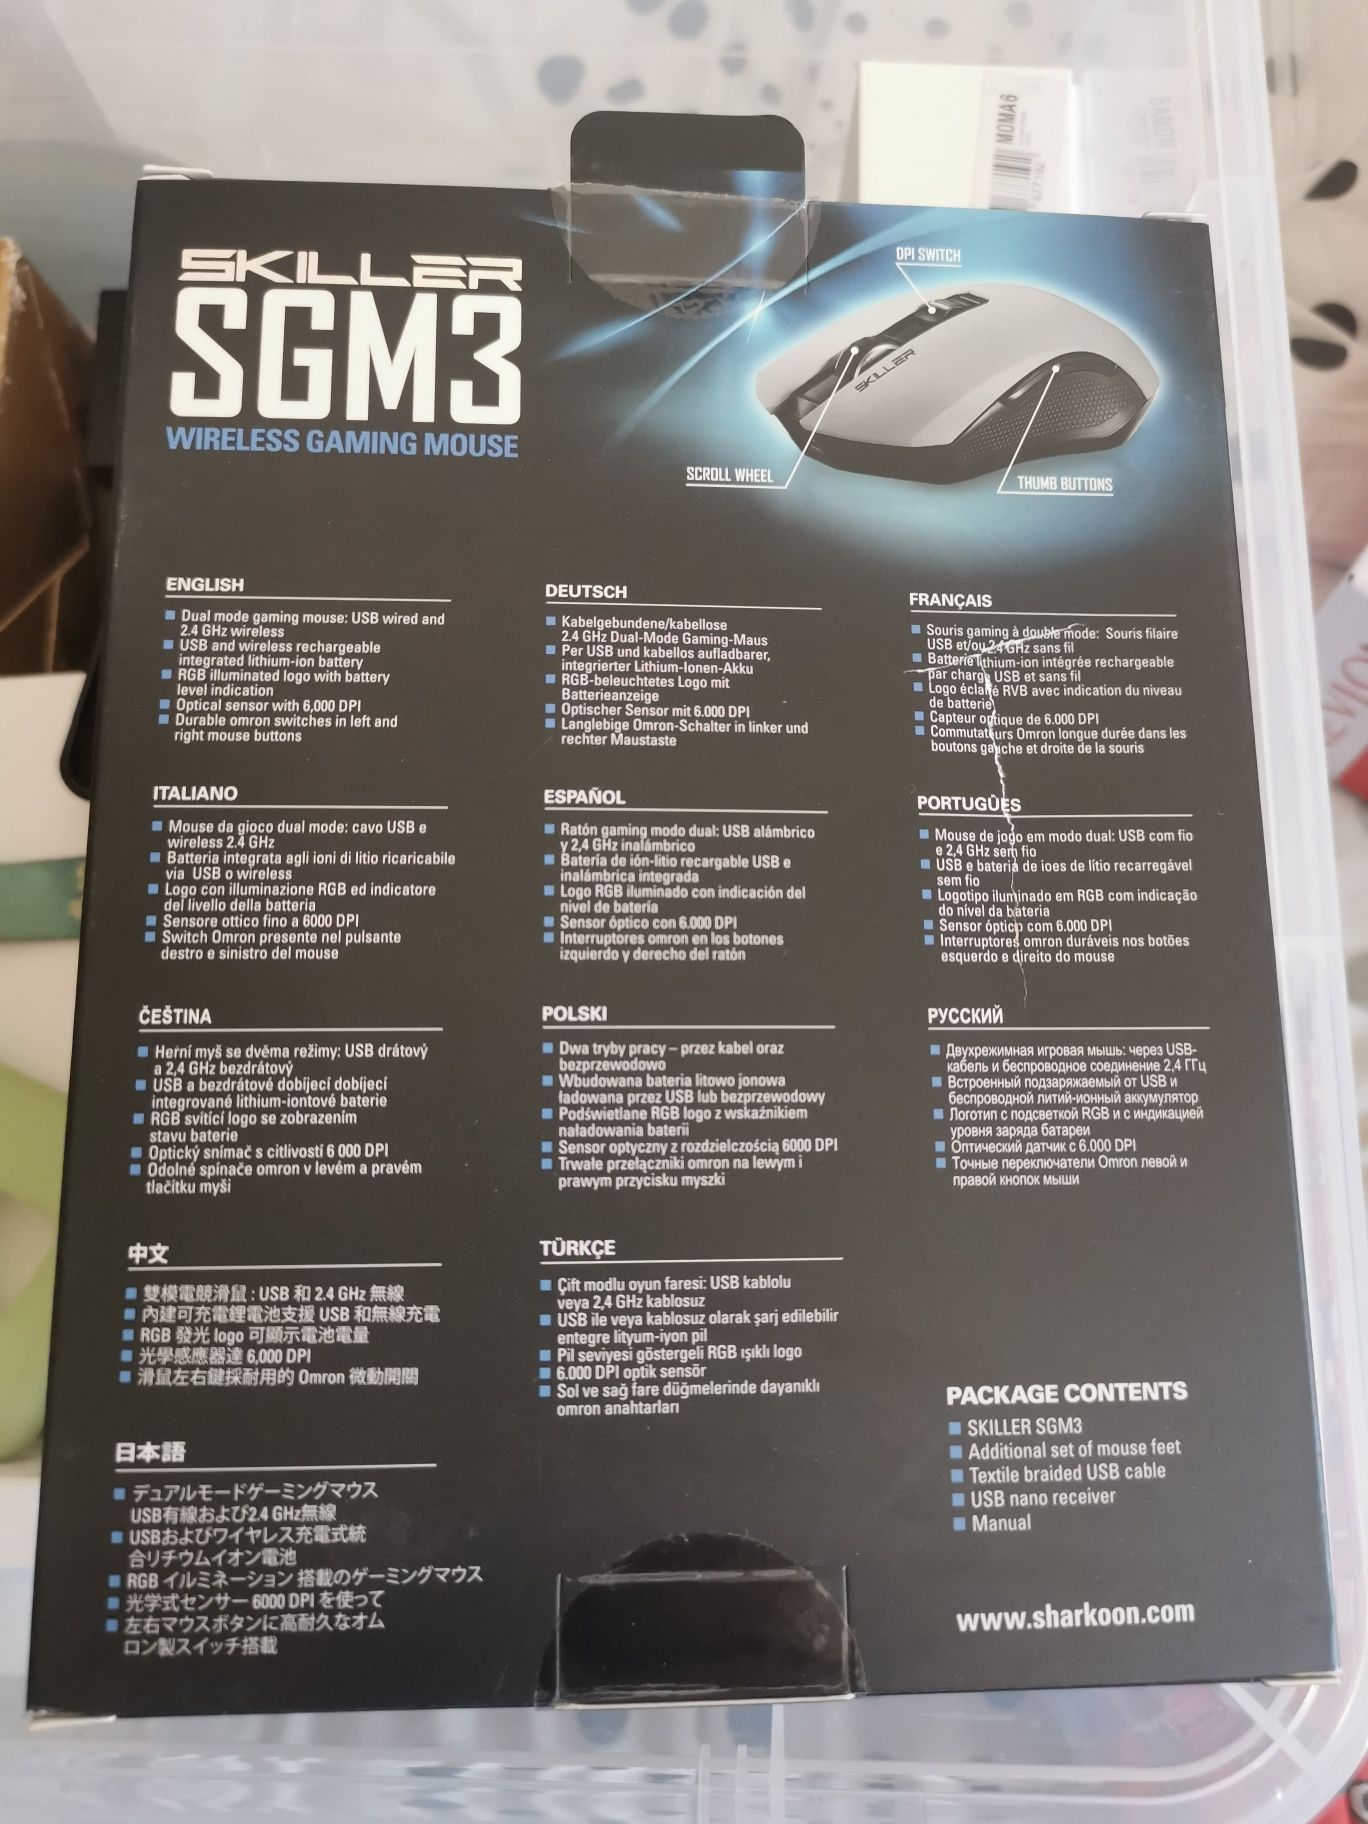 Skiller SGM3 wireless gaming mouse